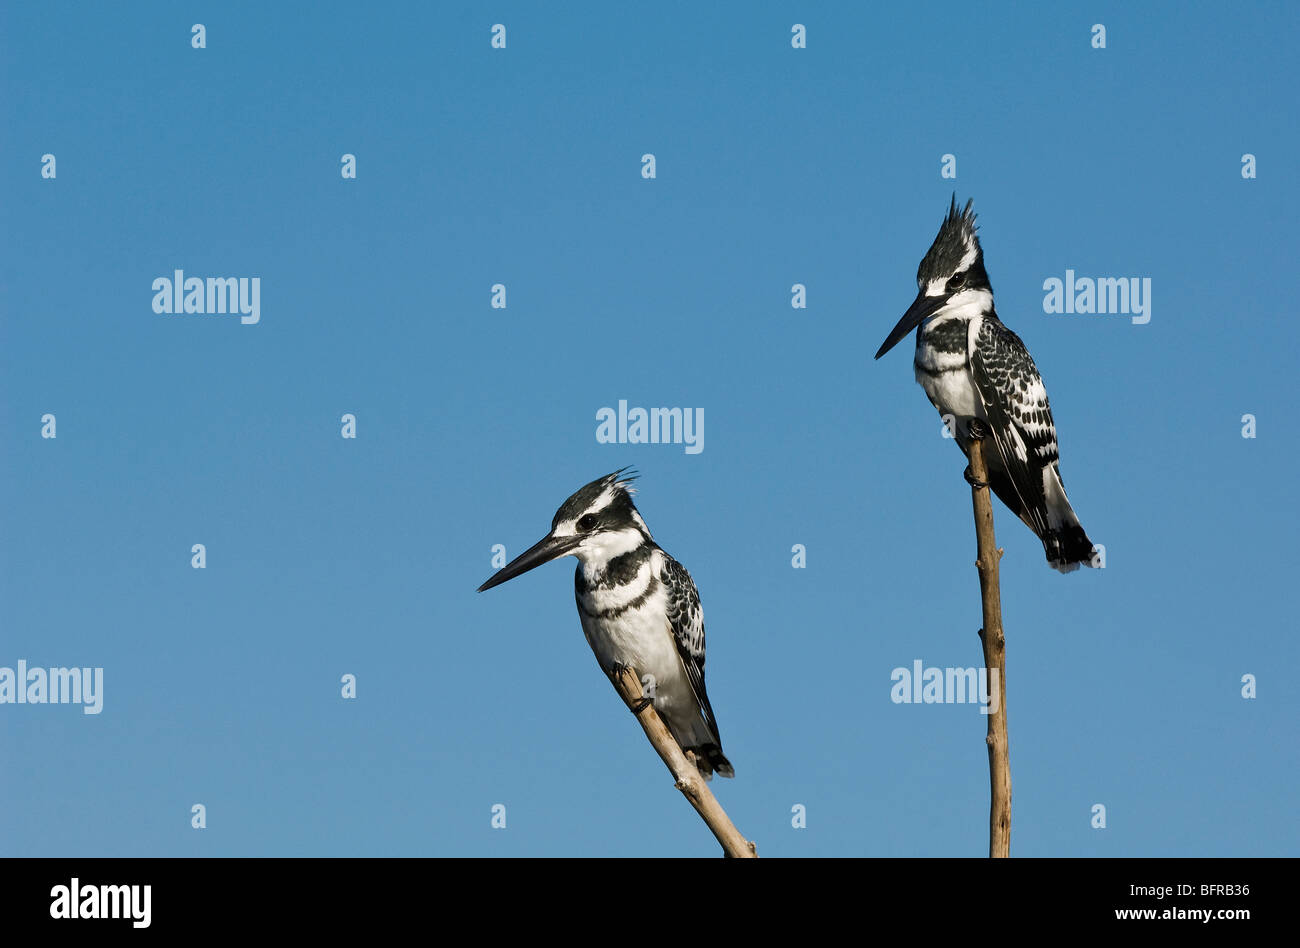 Two Pied kingfishers perched on reeds against a blue sky Stock Photo